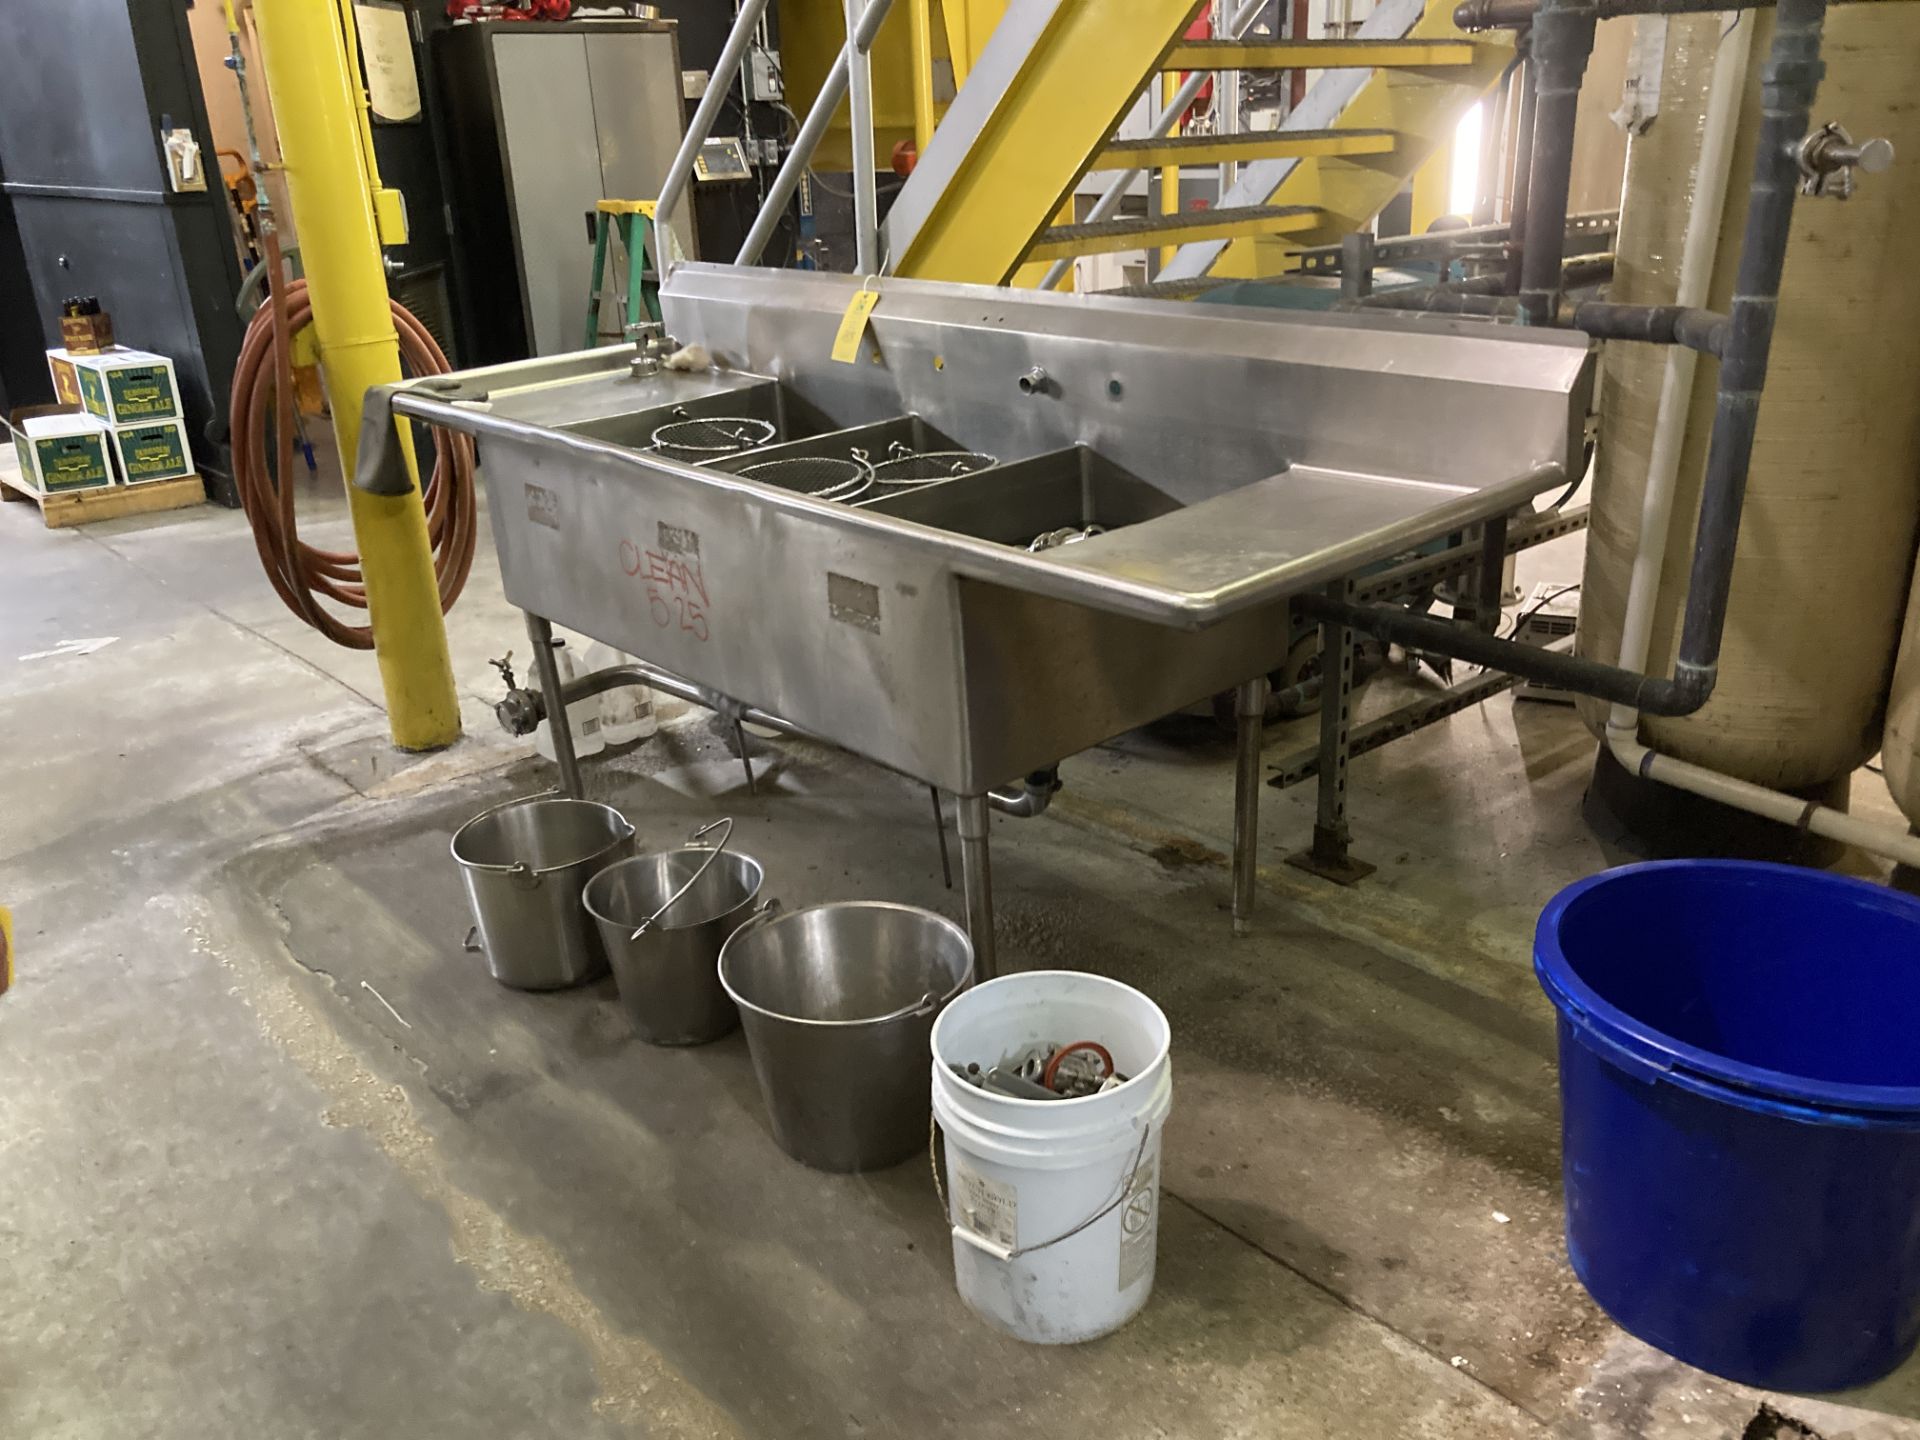 Stainless 3 bowl sink with content of sight glasses, clamps, butterfly valves, baskets, and